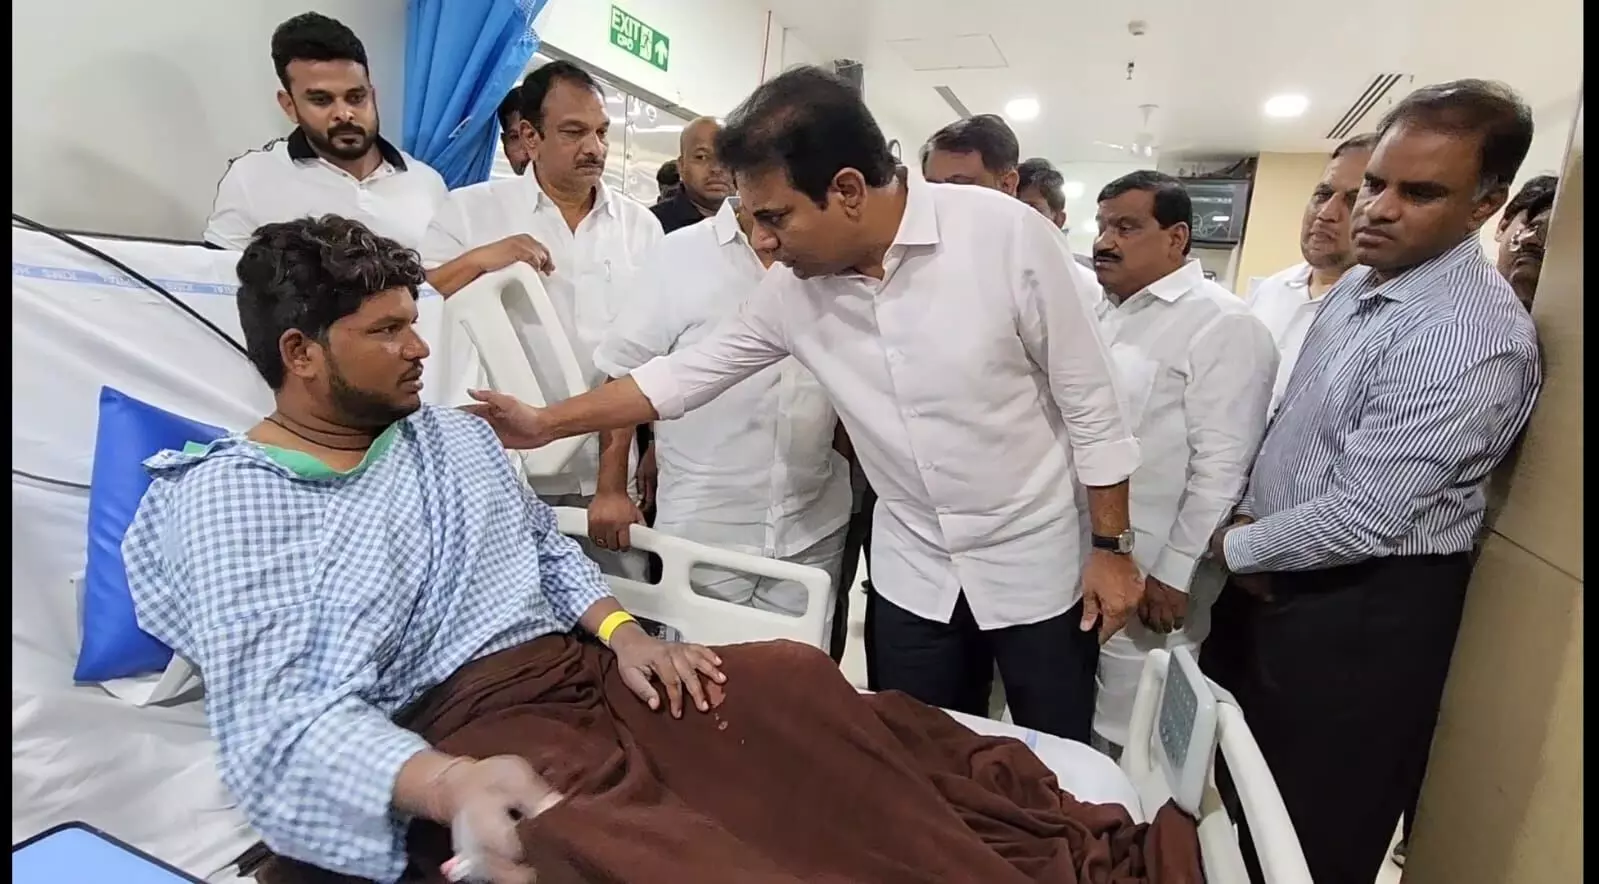 Flyover accident: KTR visits injured at KIMS; promises support, strict action